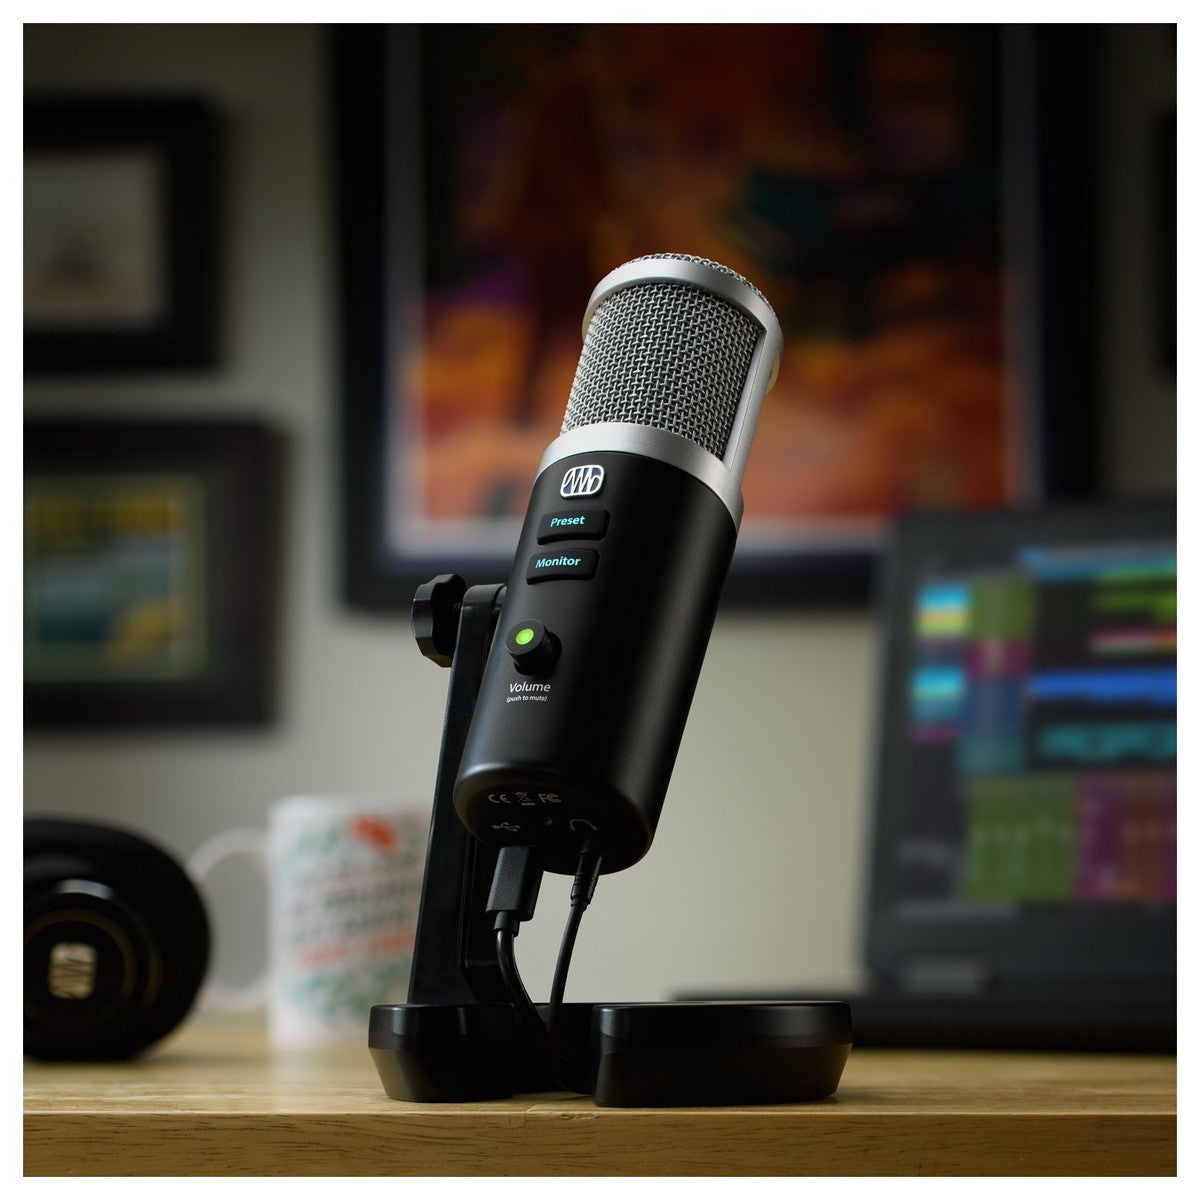 PreSonus Revelator: Professional USB microphone for streaming, podcasting, gaming, and more